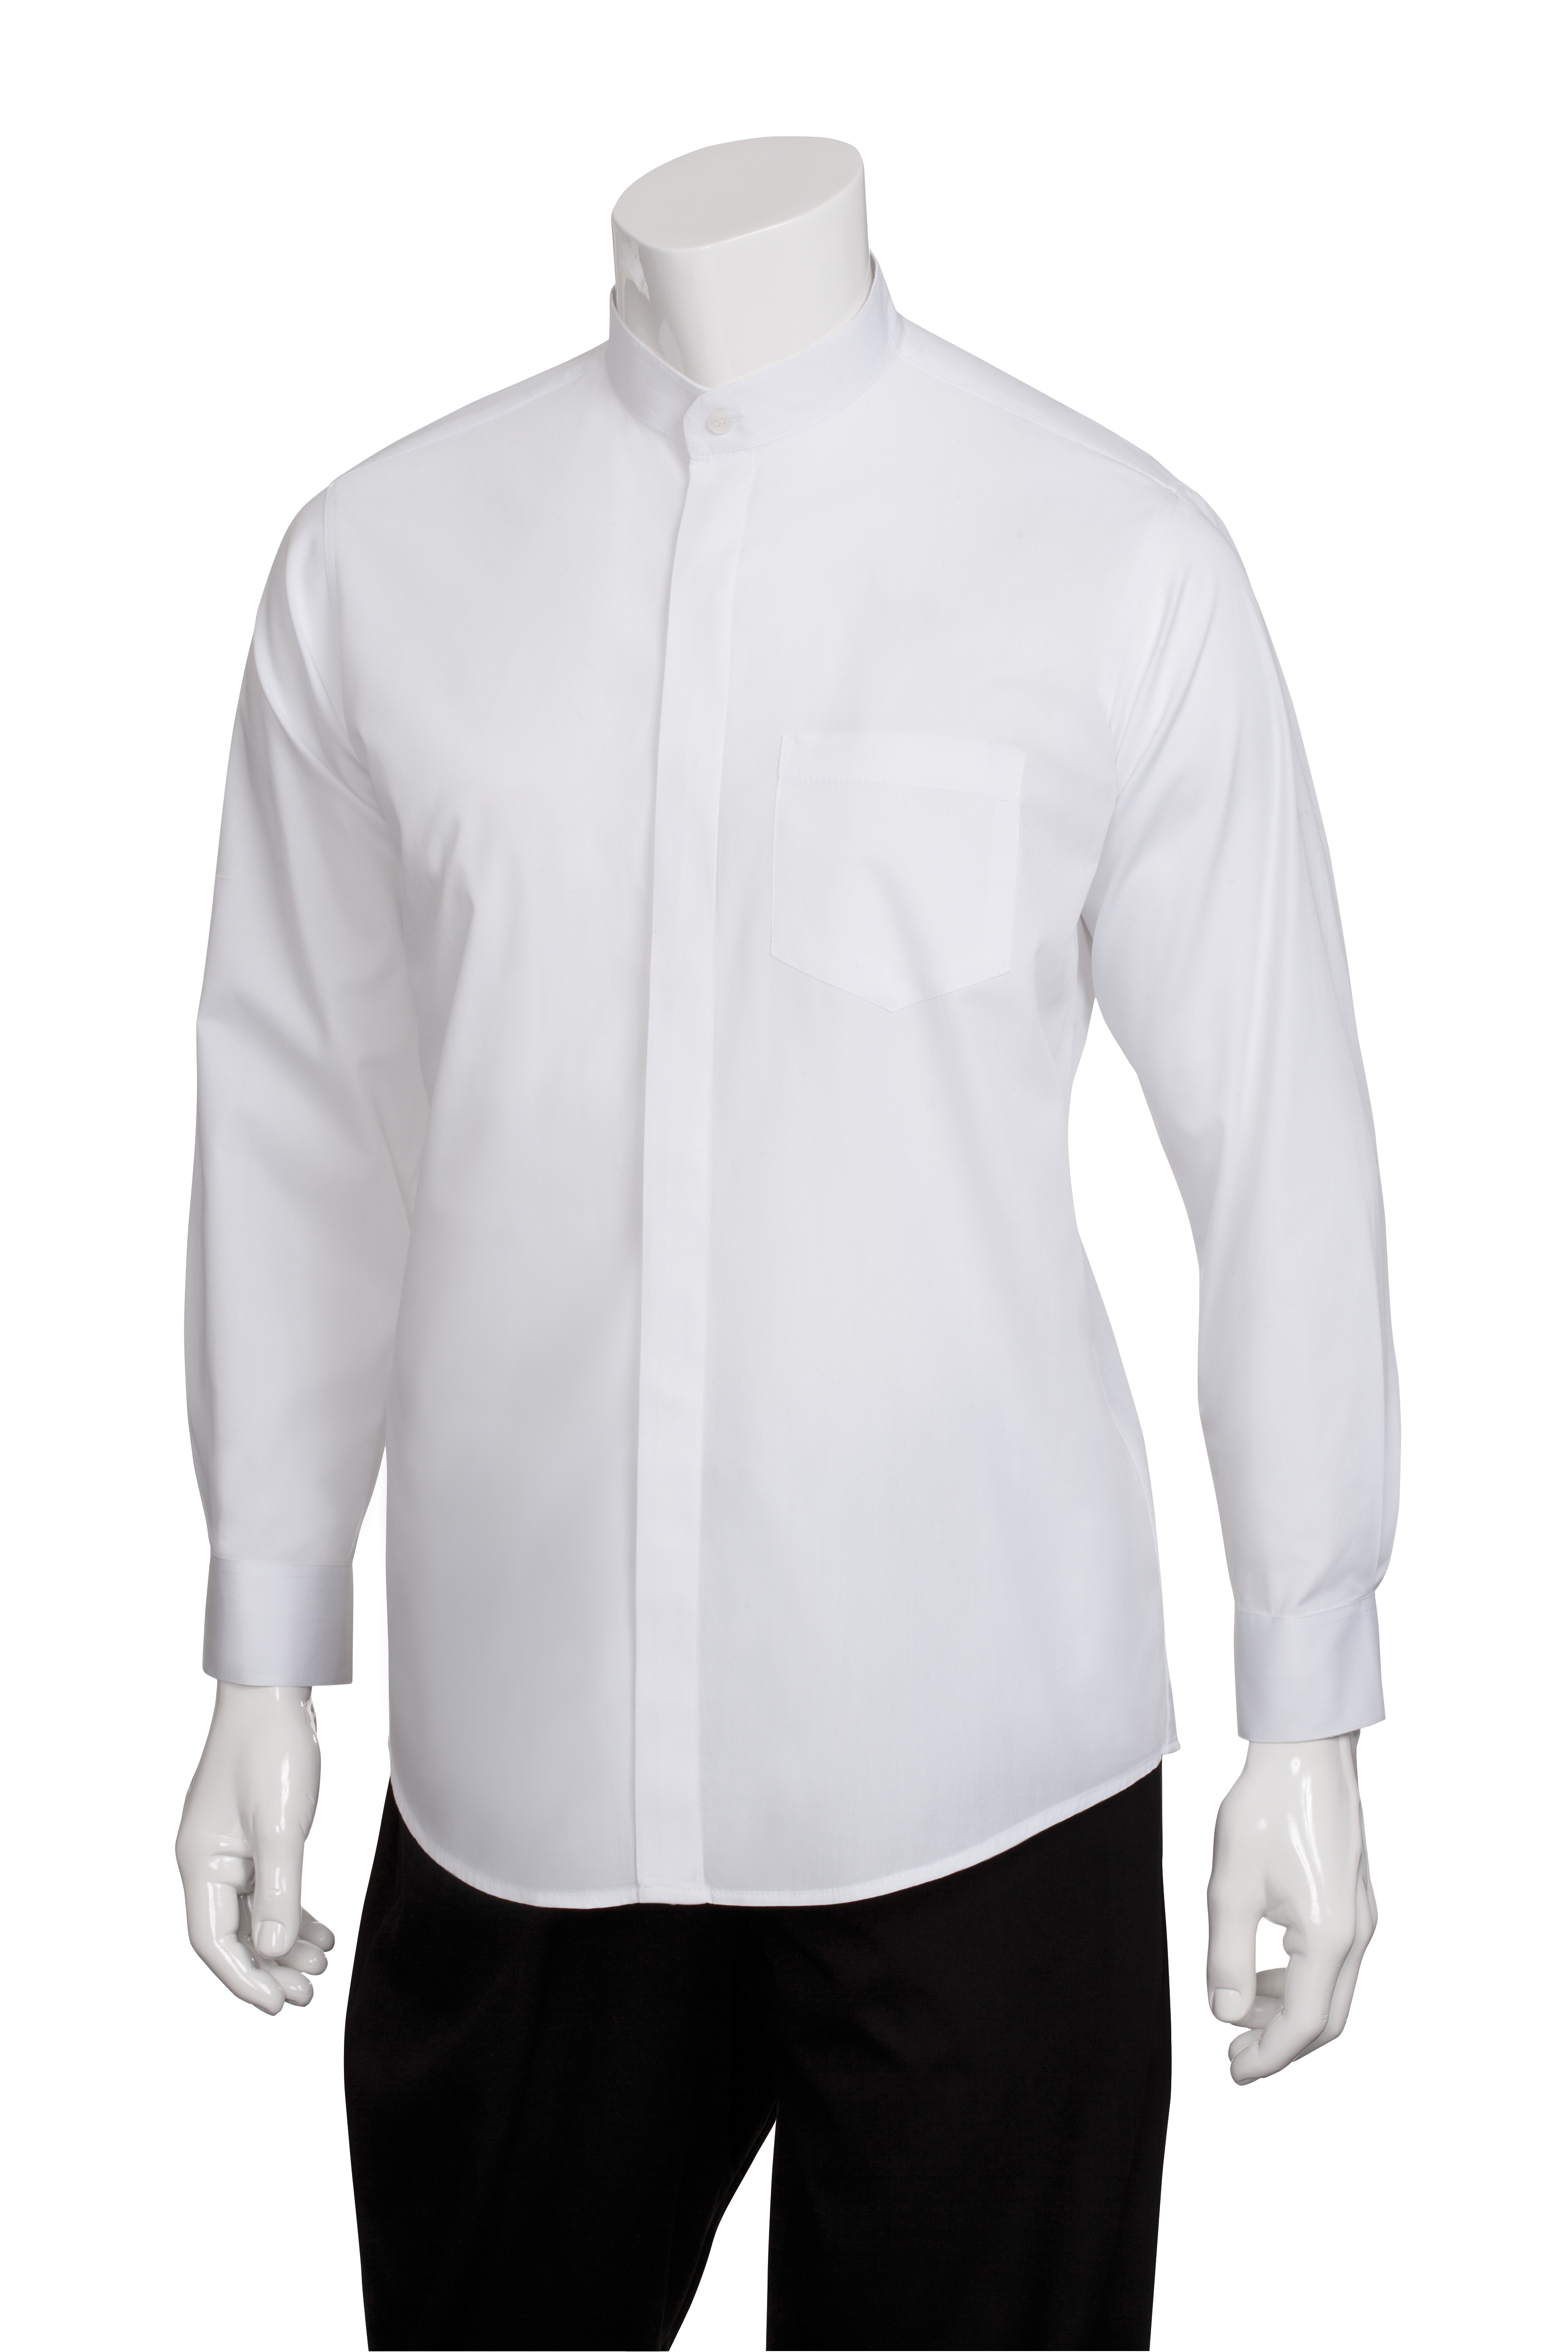 Chef Works Shirt - Banded B100